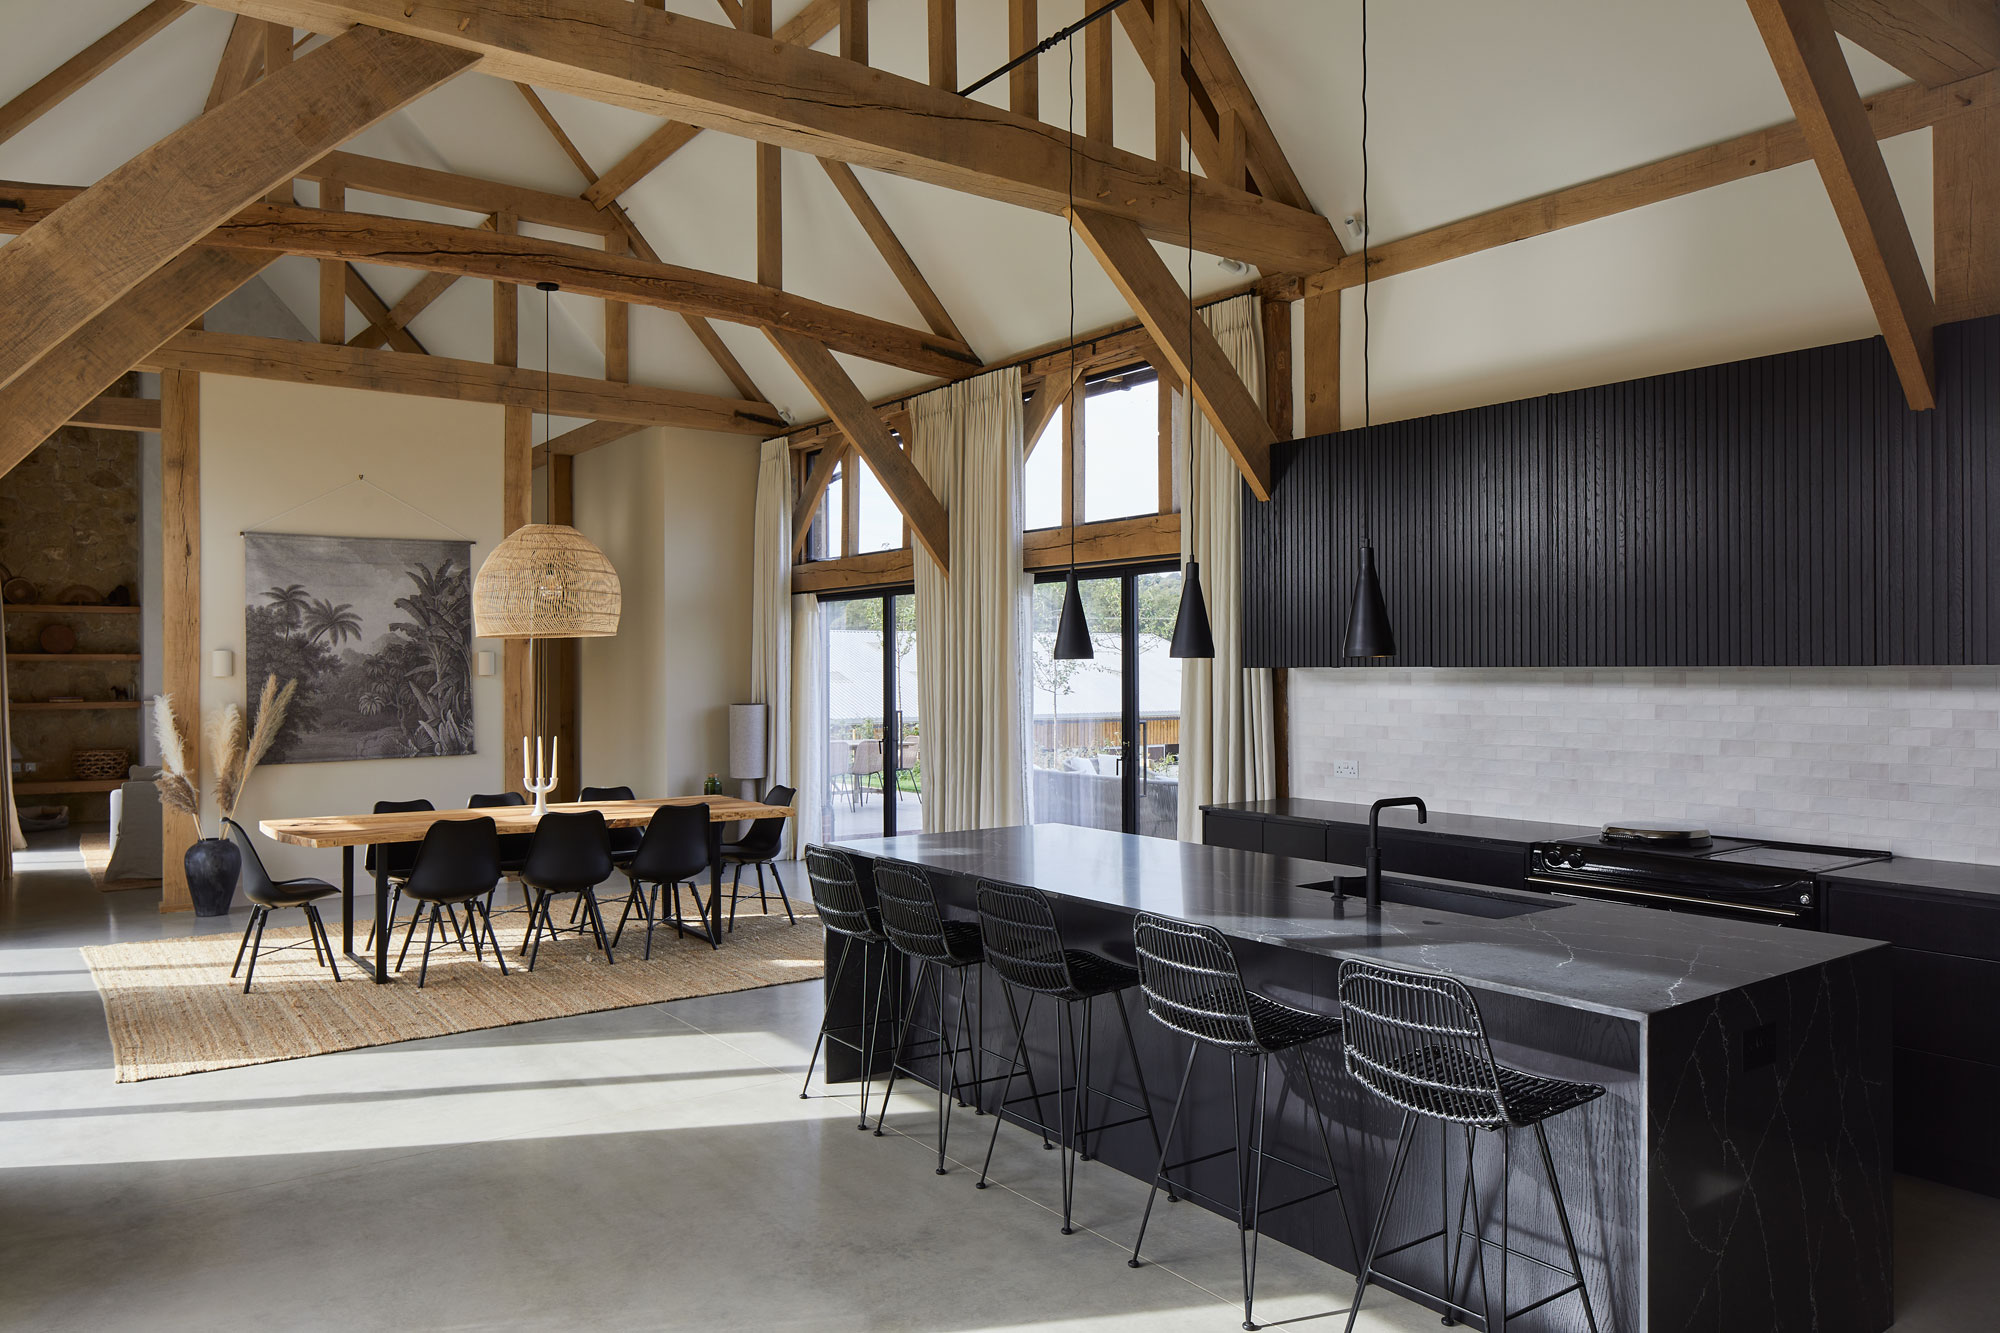 The sleek modern kitchen contrast with the traditional timbers and exterior